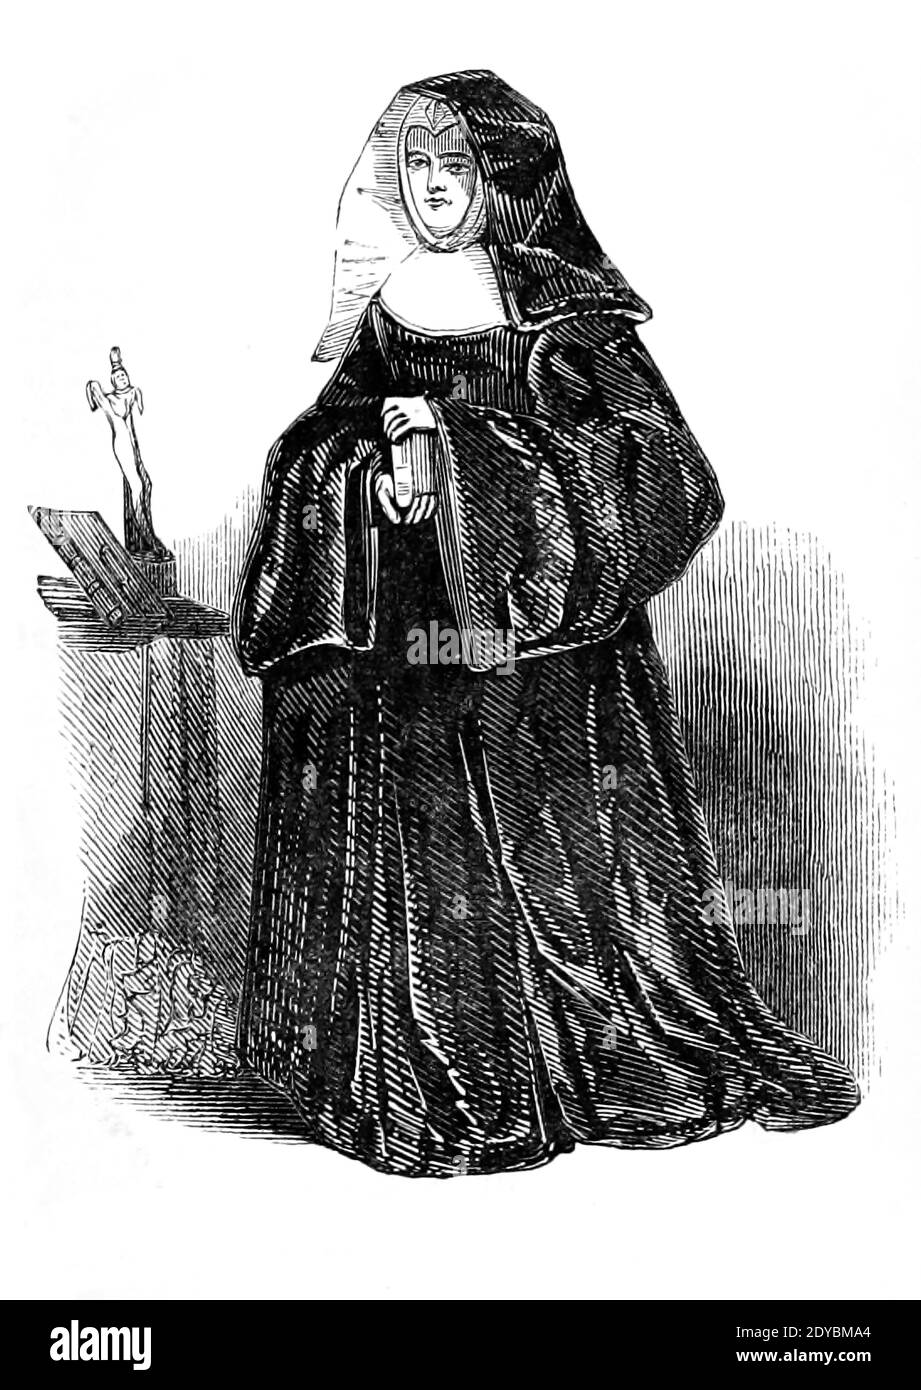 The Abbess From the book The wanderings of a pen and pencil by Palmer, F. P. (Francis Paul); Illustrated by Crowquill, Alfred, [Alfred Henry Forrester]  Published in London by Jeremiah How in 1846 Stock Photo